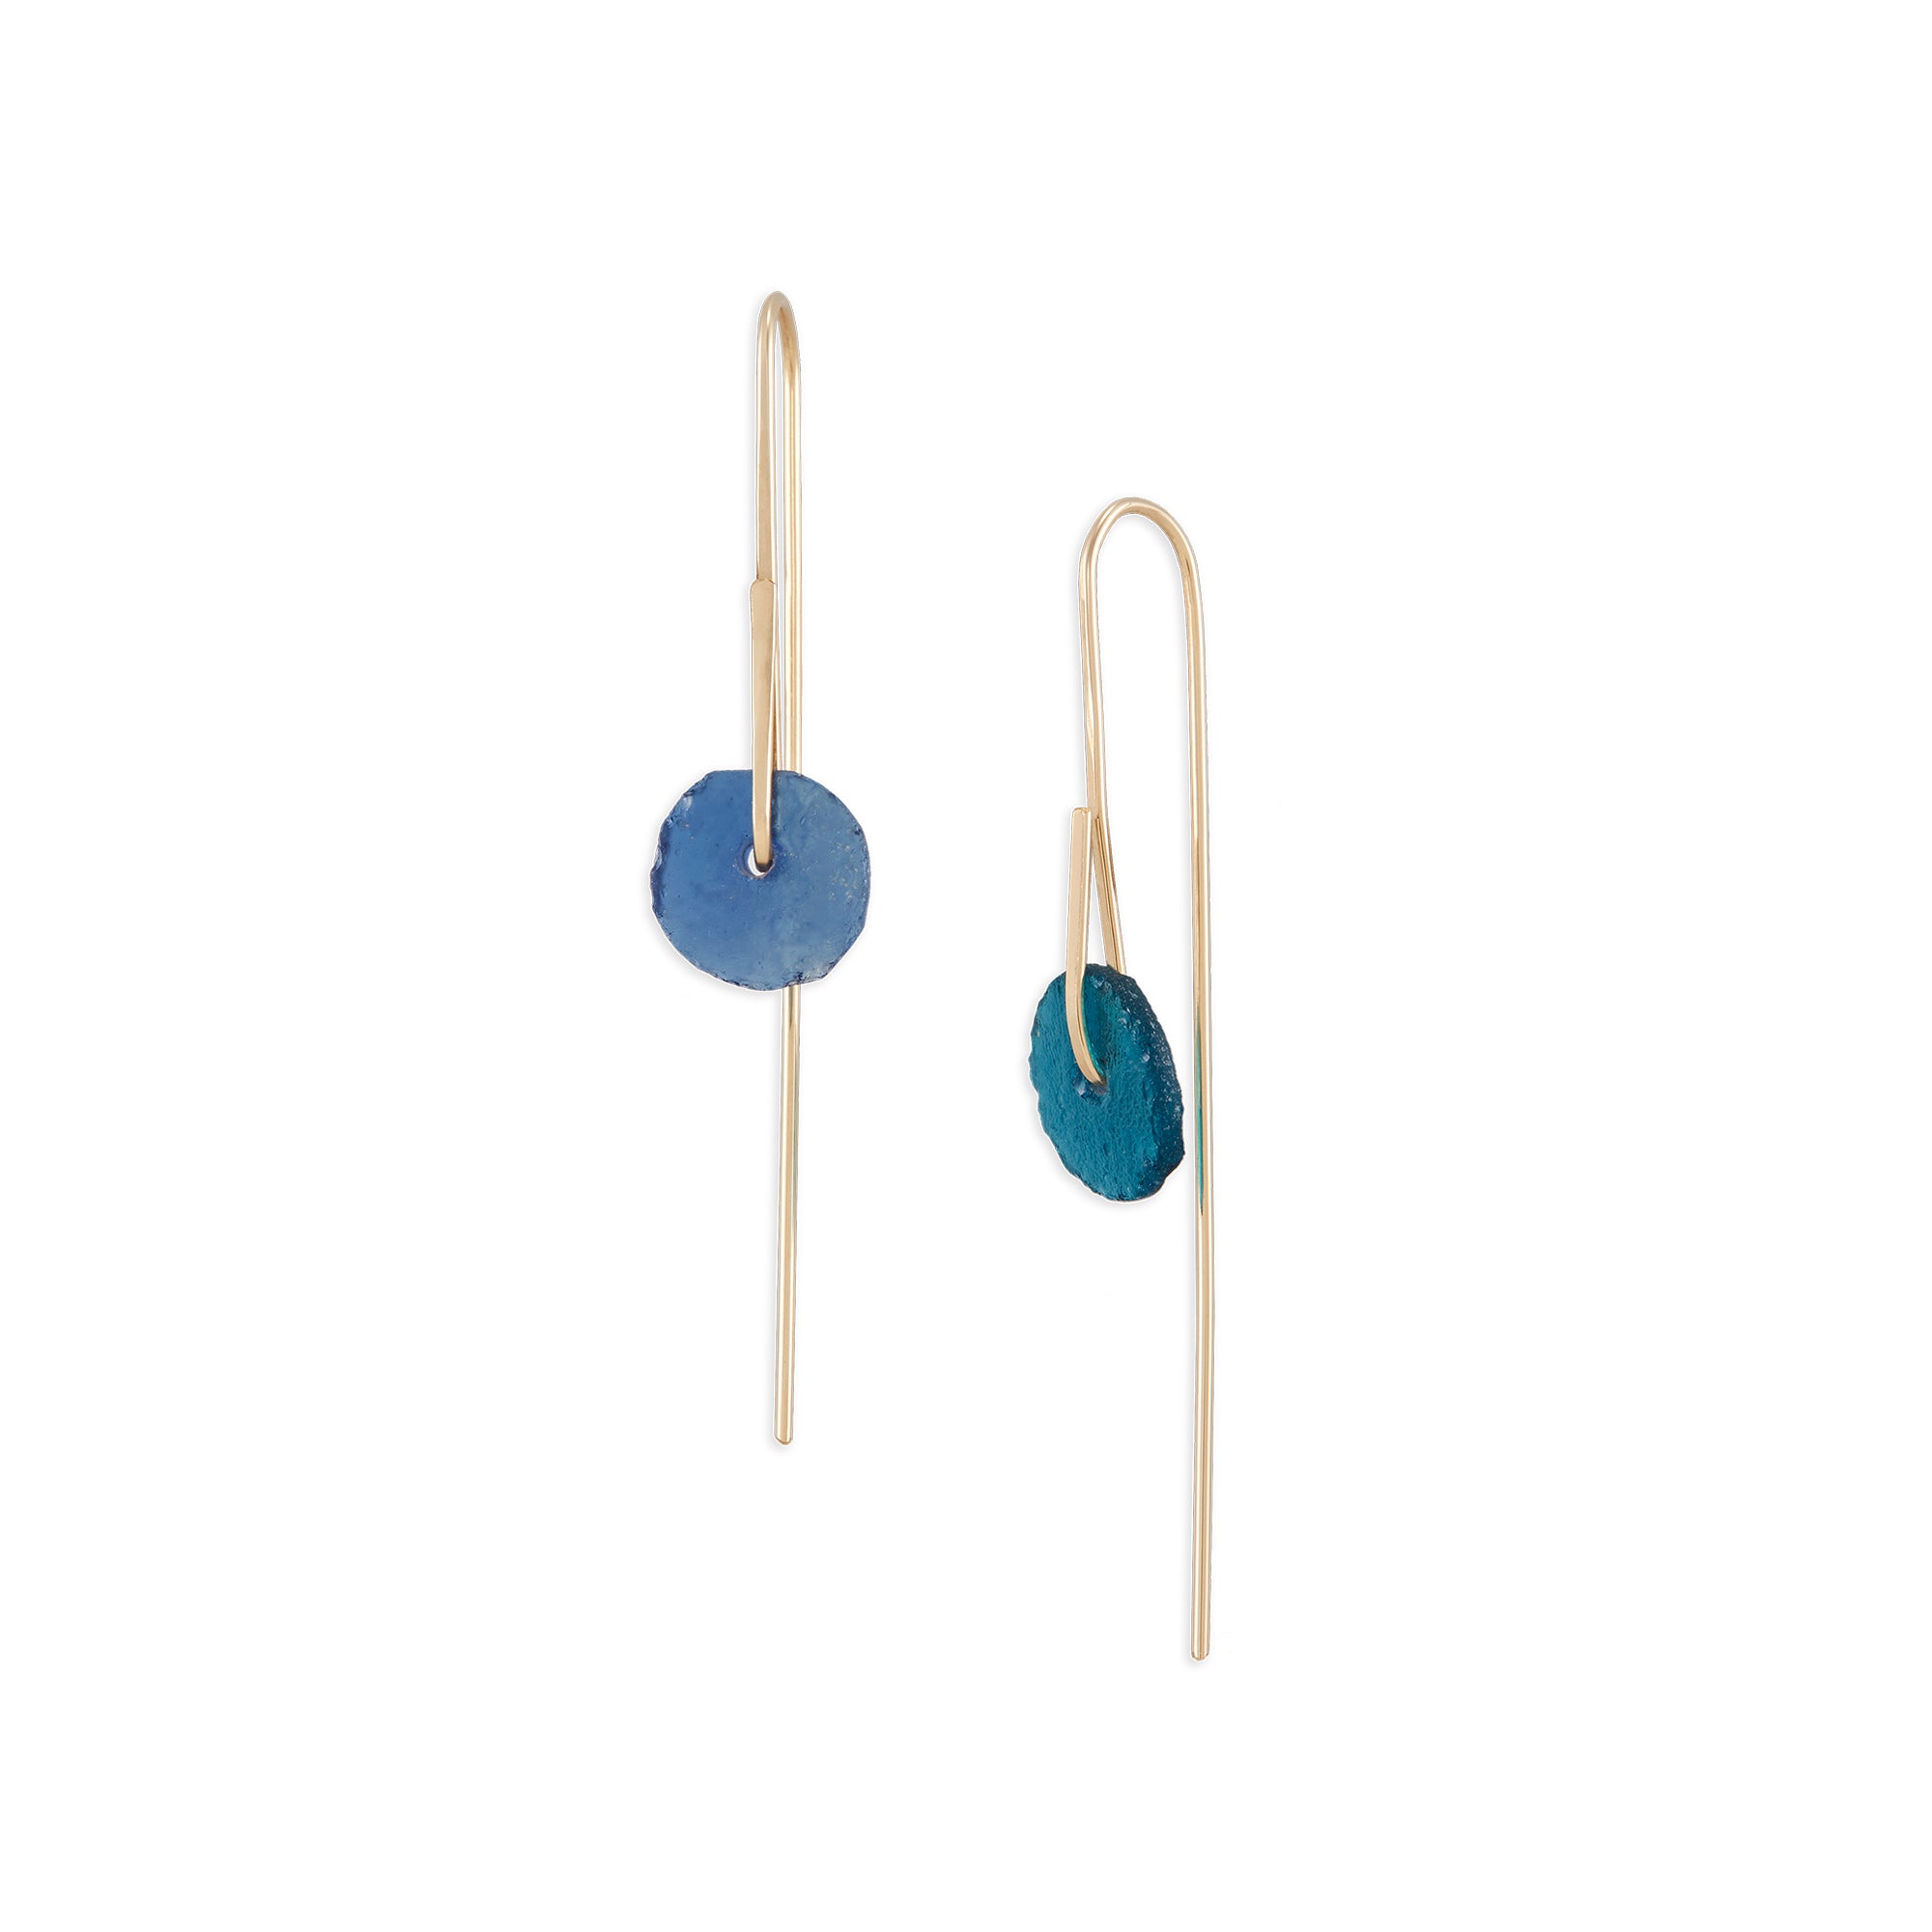 Simple small threader style earrings featuring hand-hammered 14k gold wire and a pair of Bactrian Glass beads